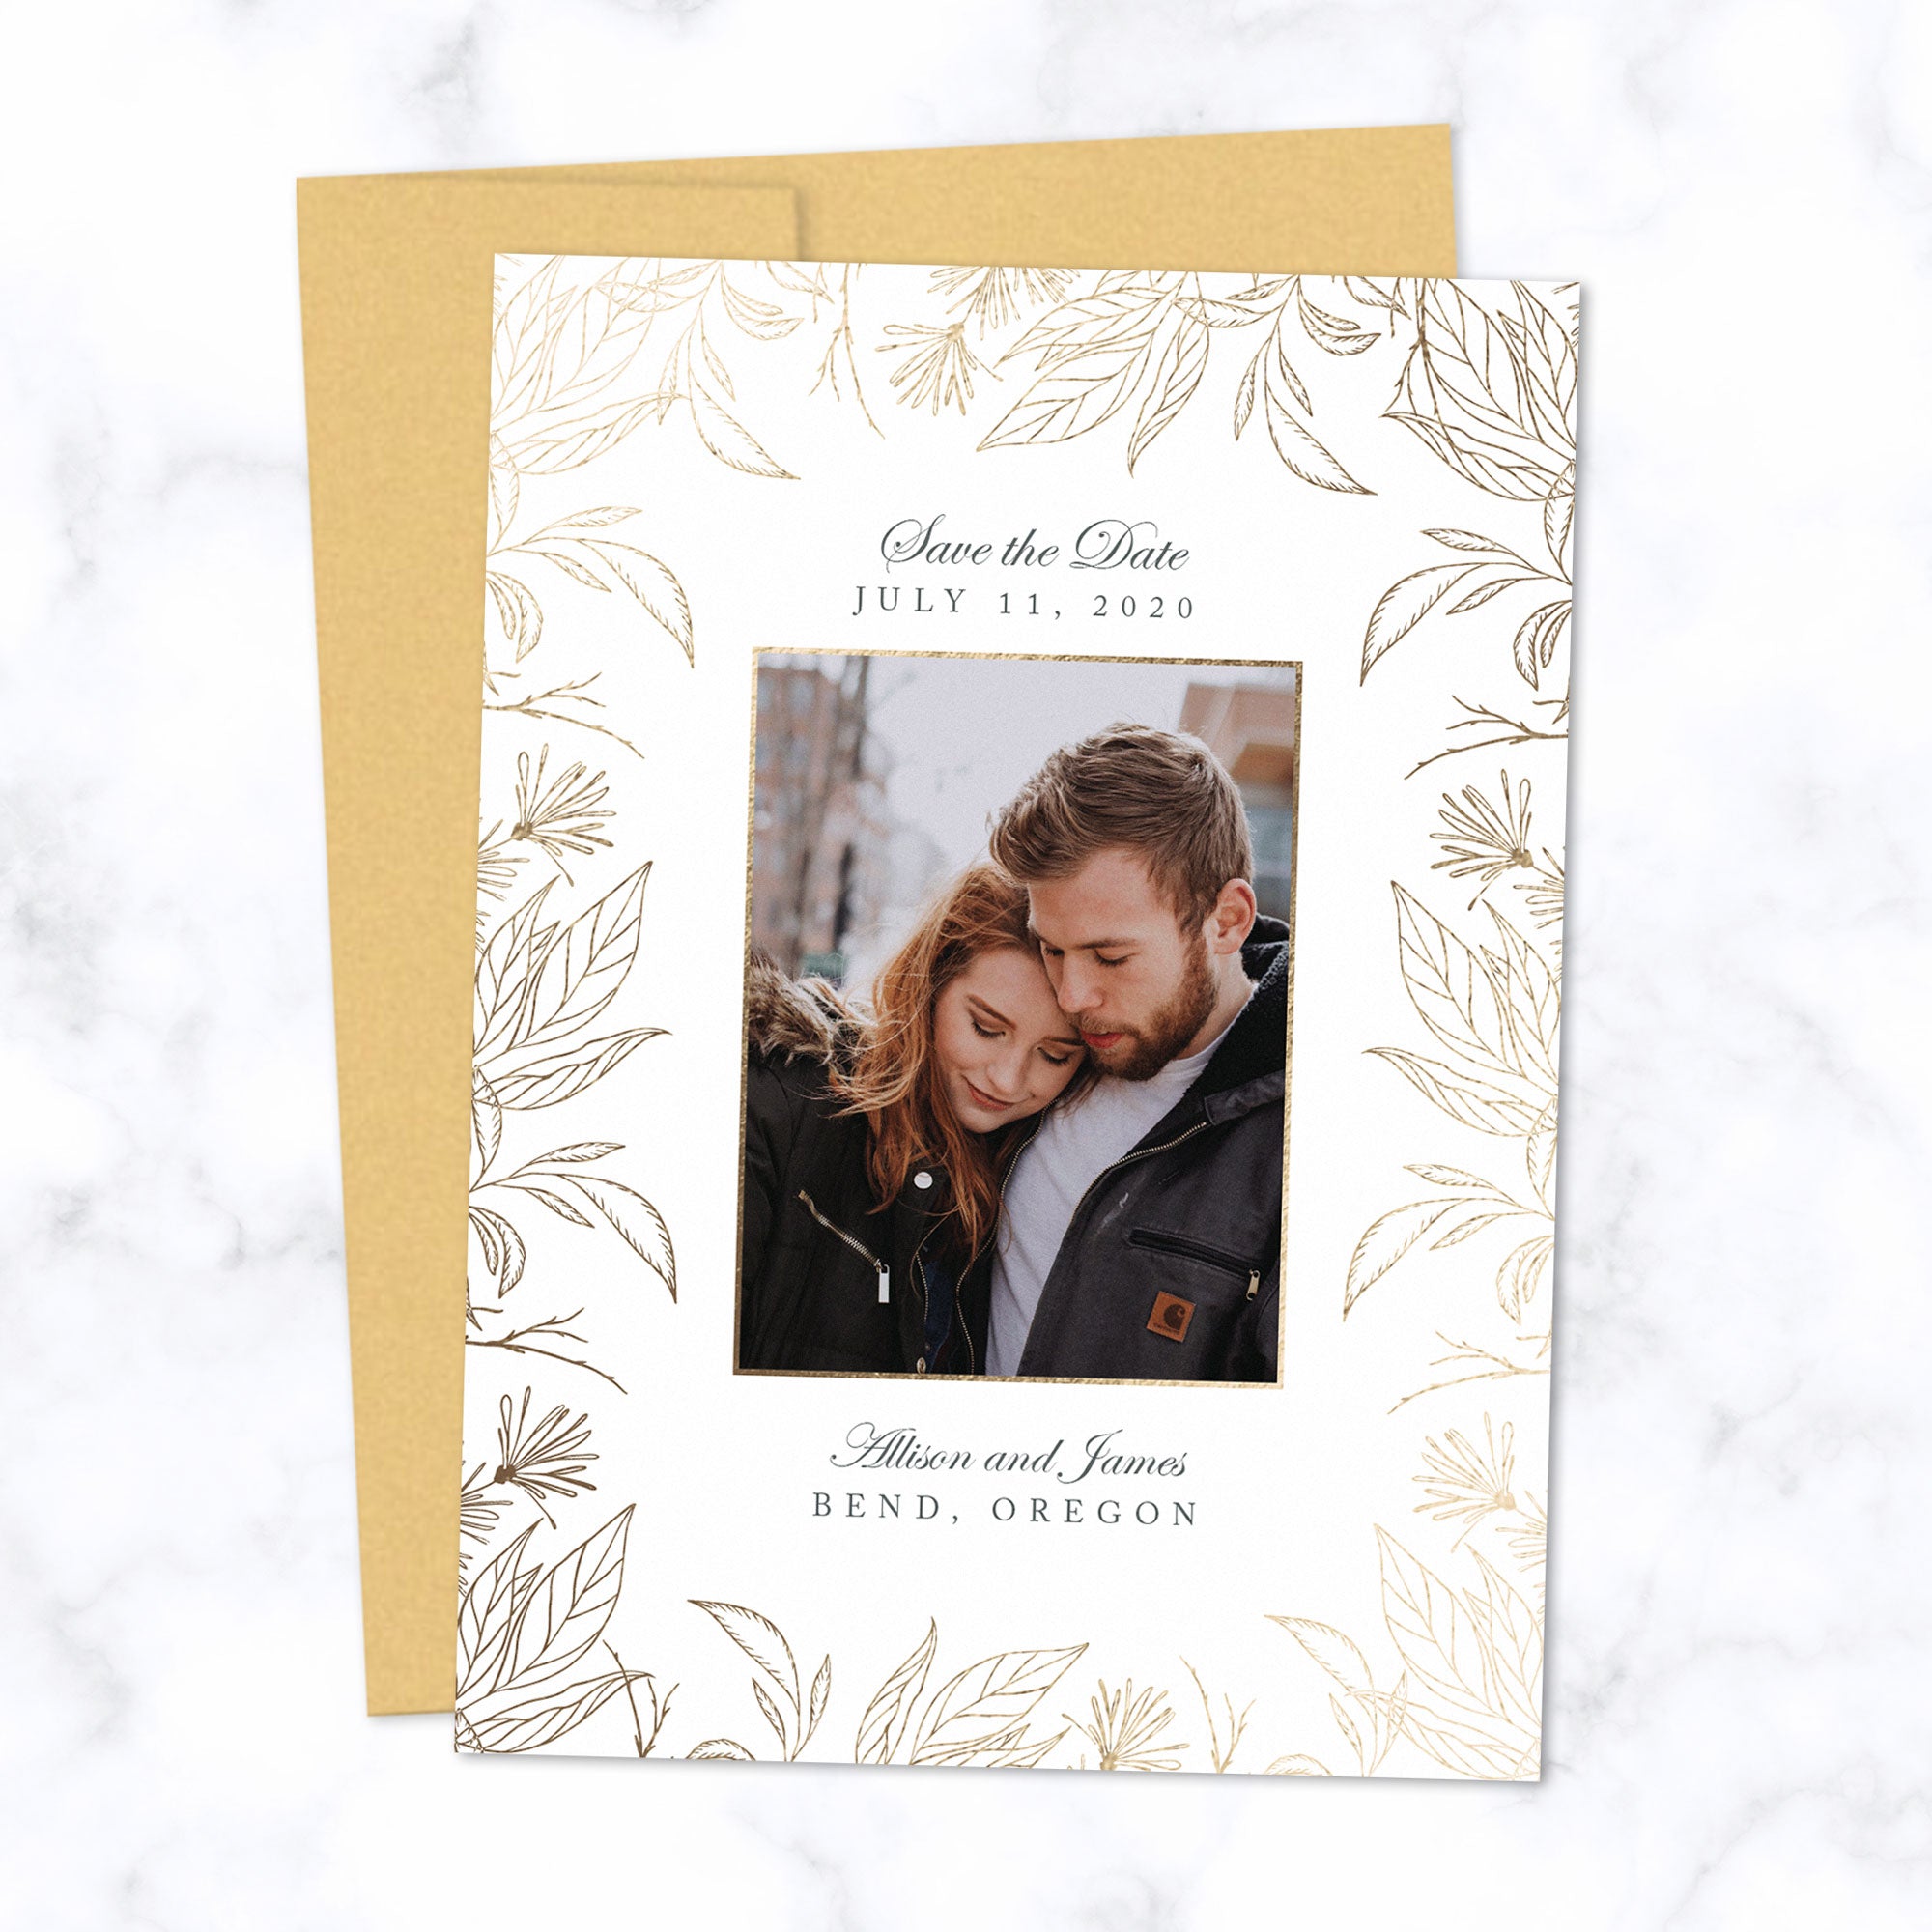 Gold Foil Botanical Frame Save the Date Card Personalized with Photo and Details shown with matching Gold envelope